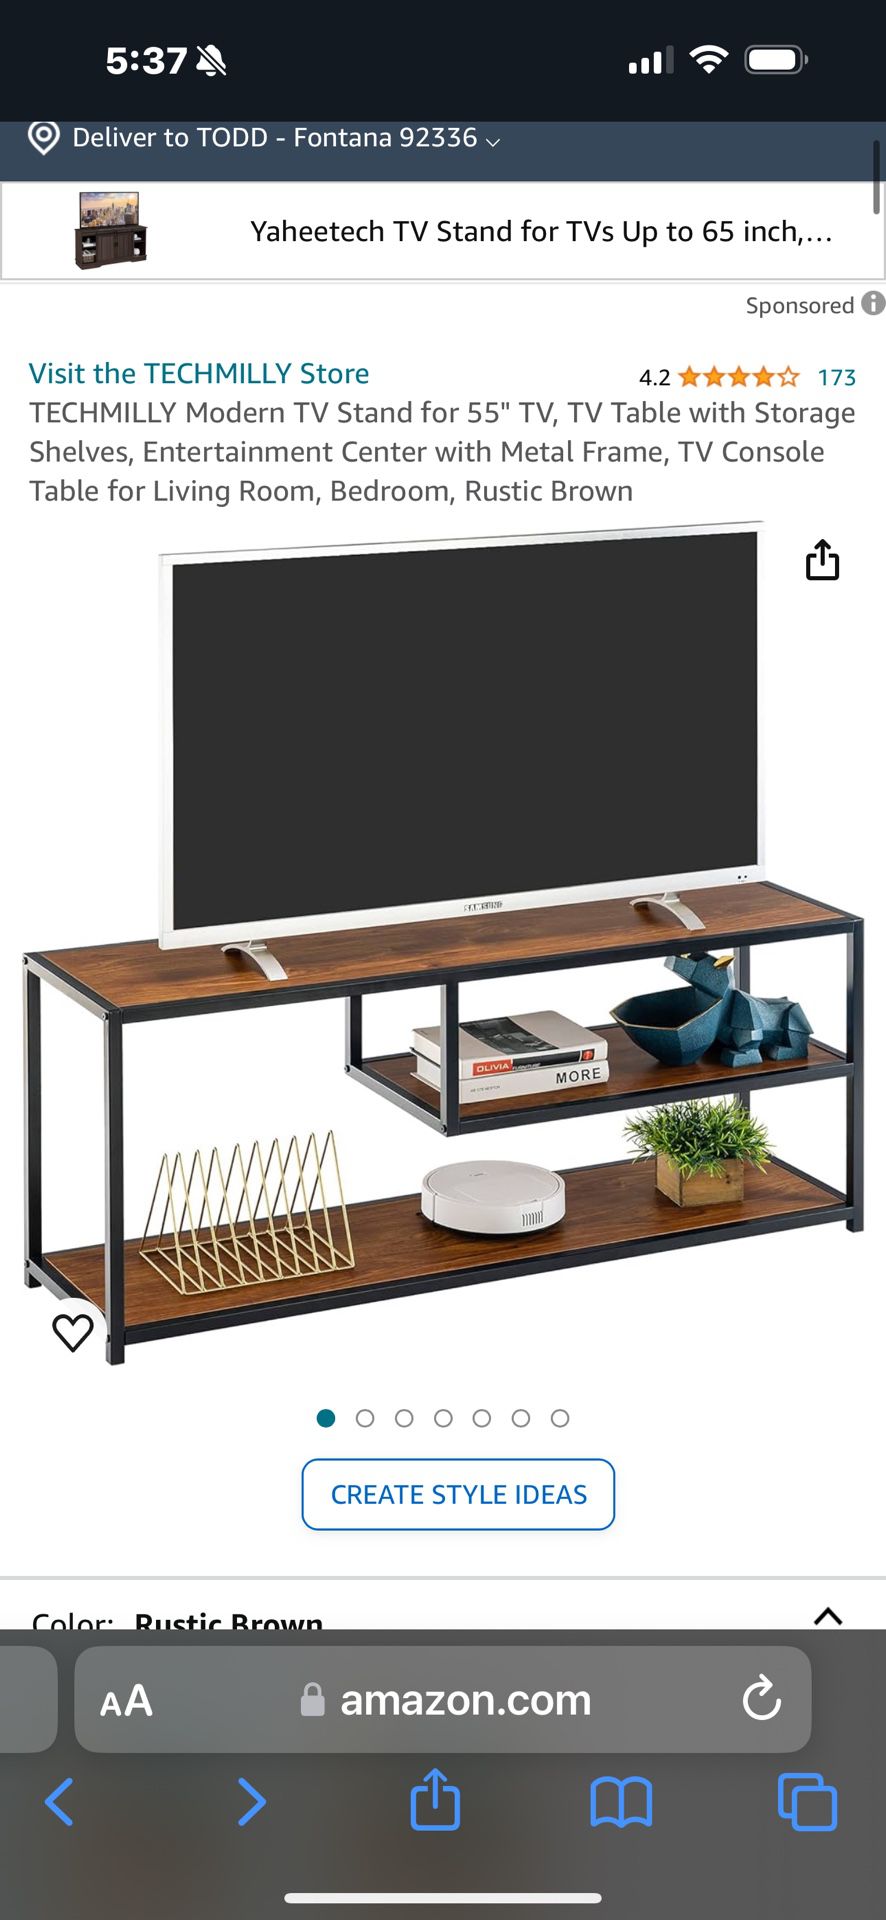 TECHMILLY Modern TV Stand for 55" TV, TV Table with Storage Shelves, Entertainment Center with Metal Frame, TV Console Table for Living Room, Bedroom,